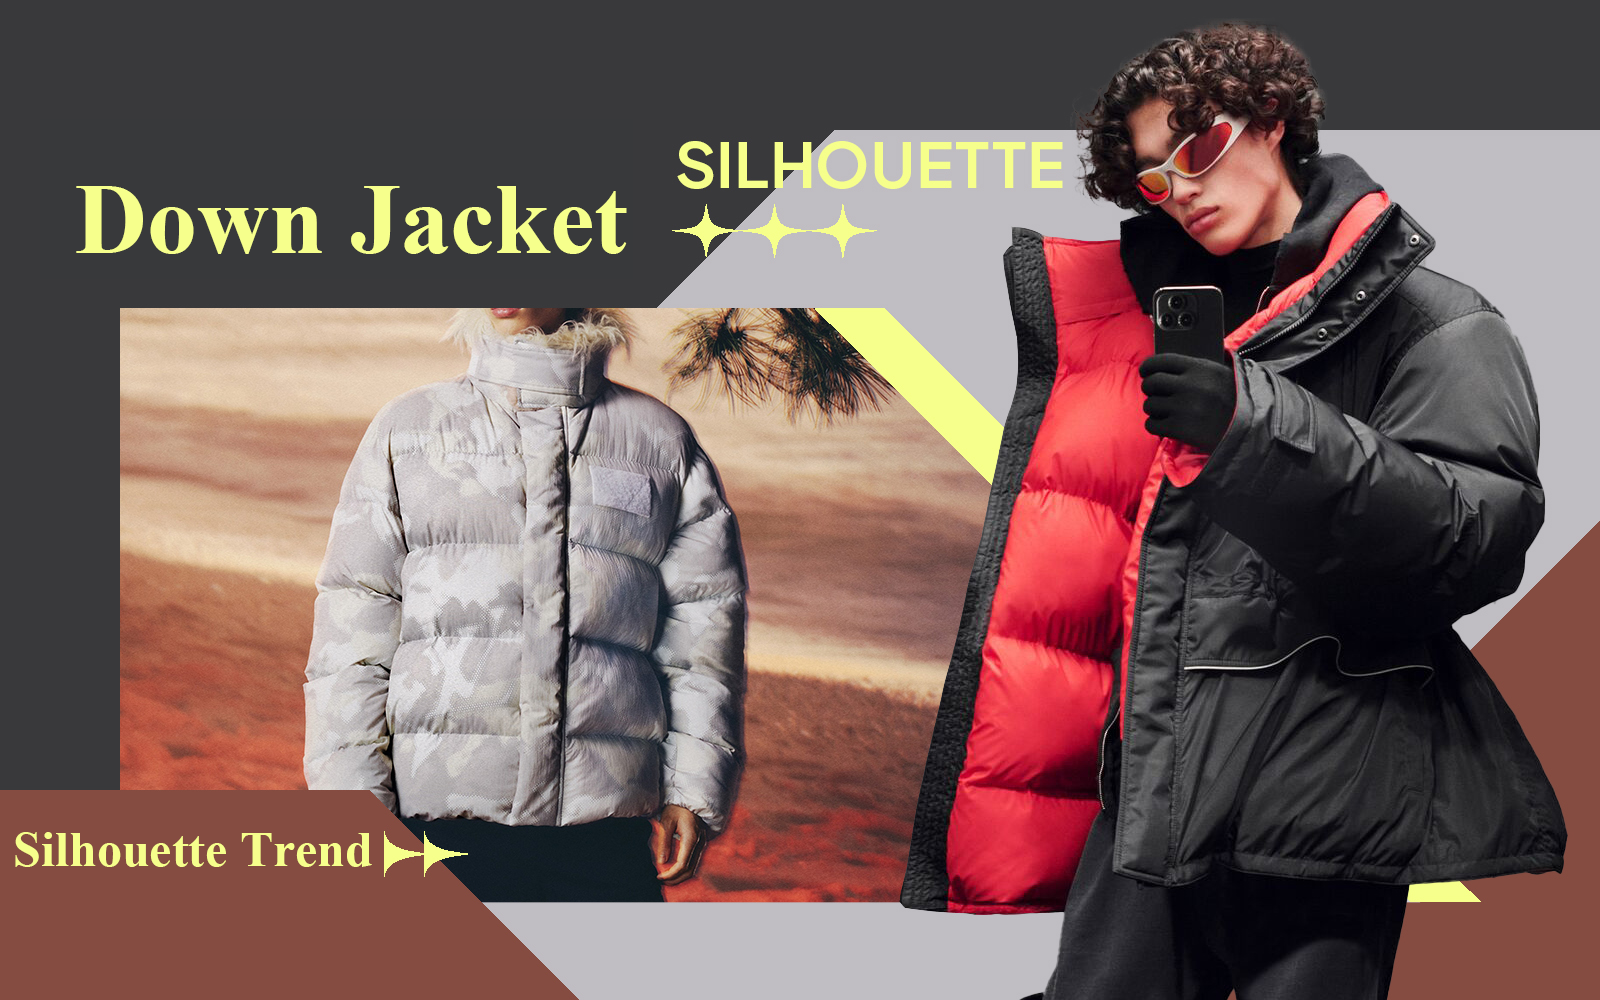 The Silhouette Trend for Men's Down Jacket